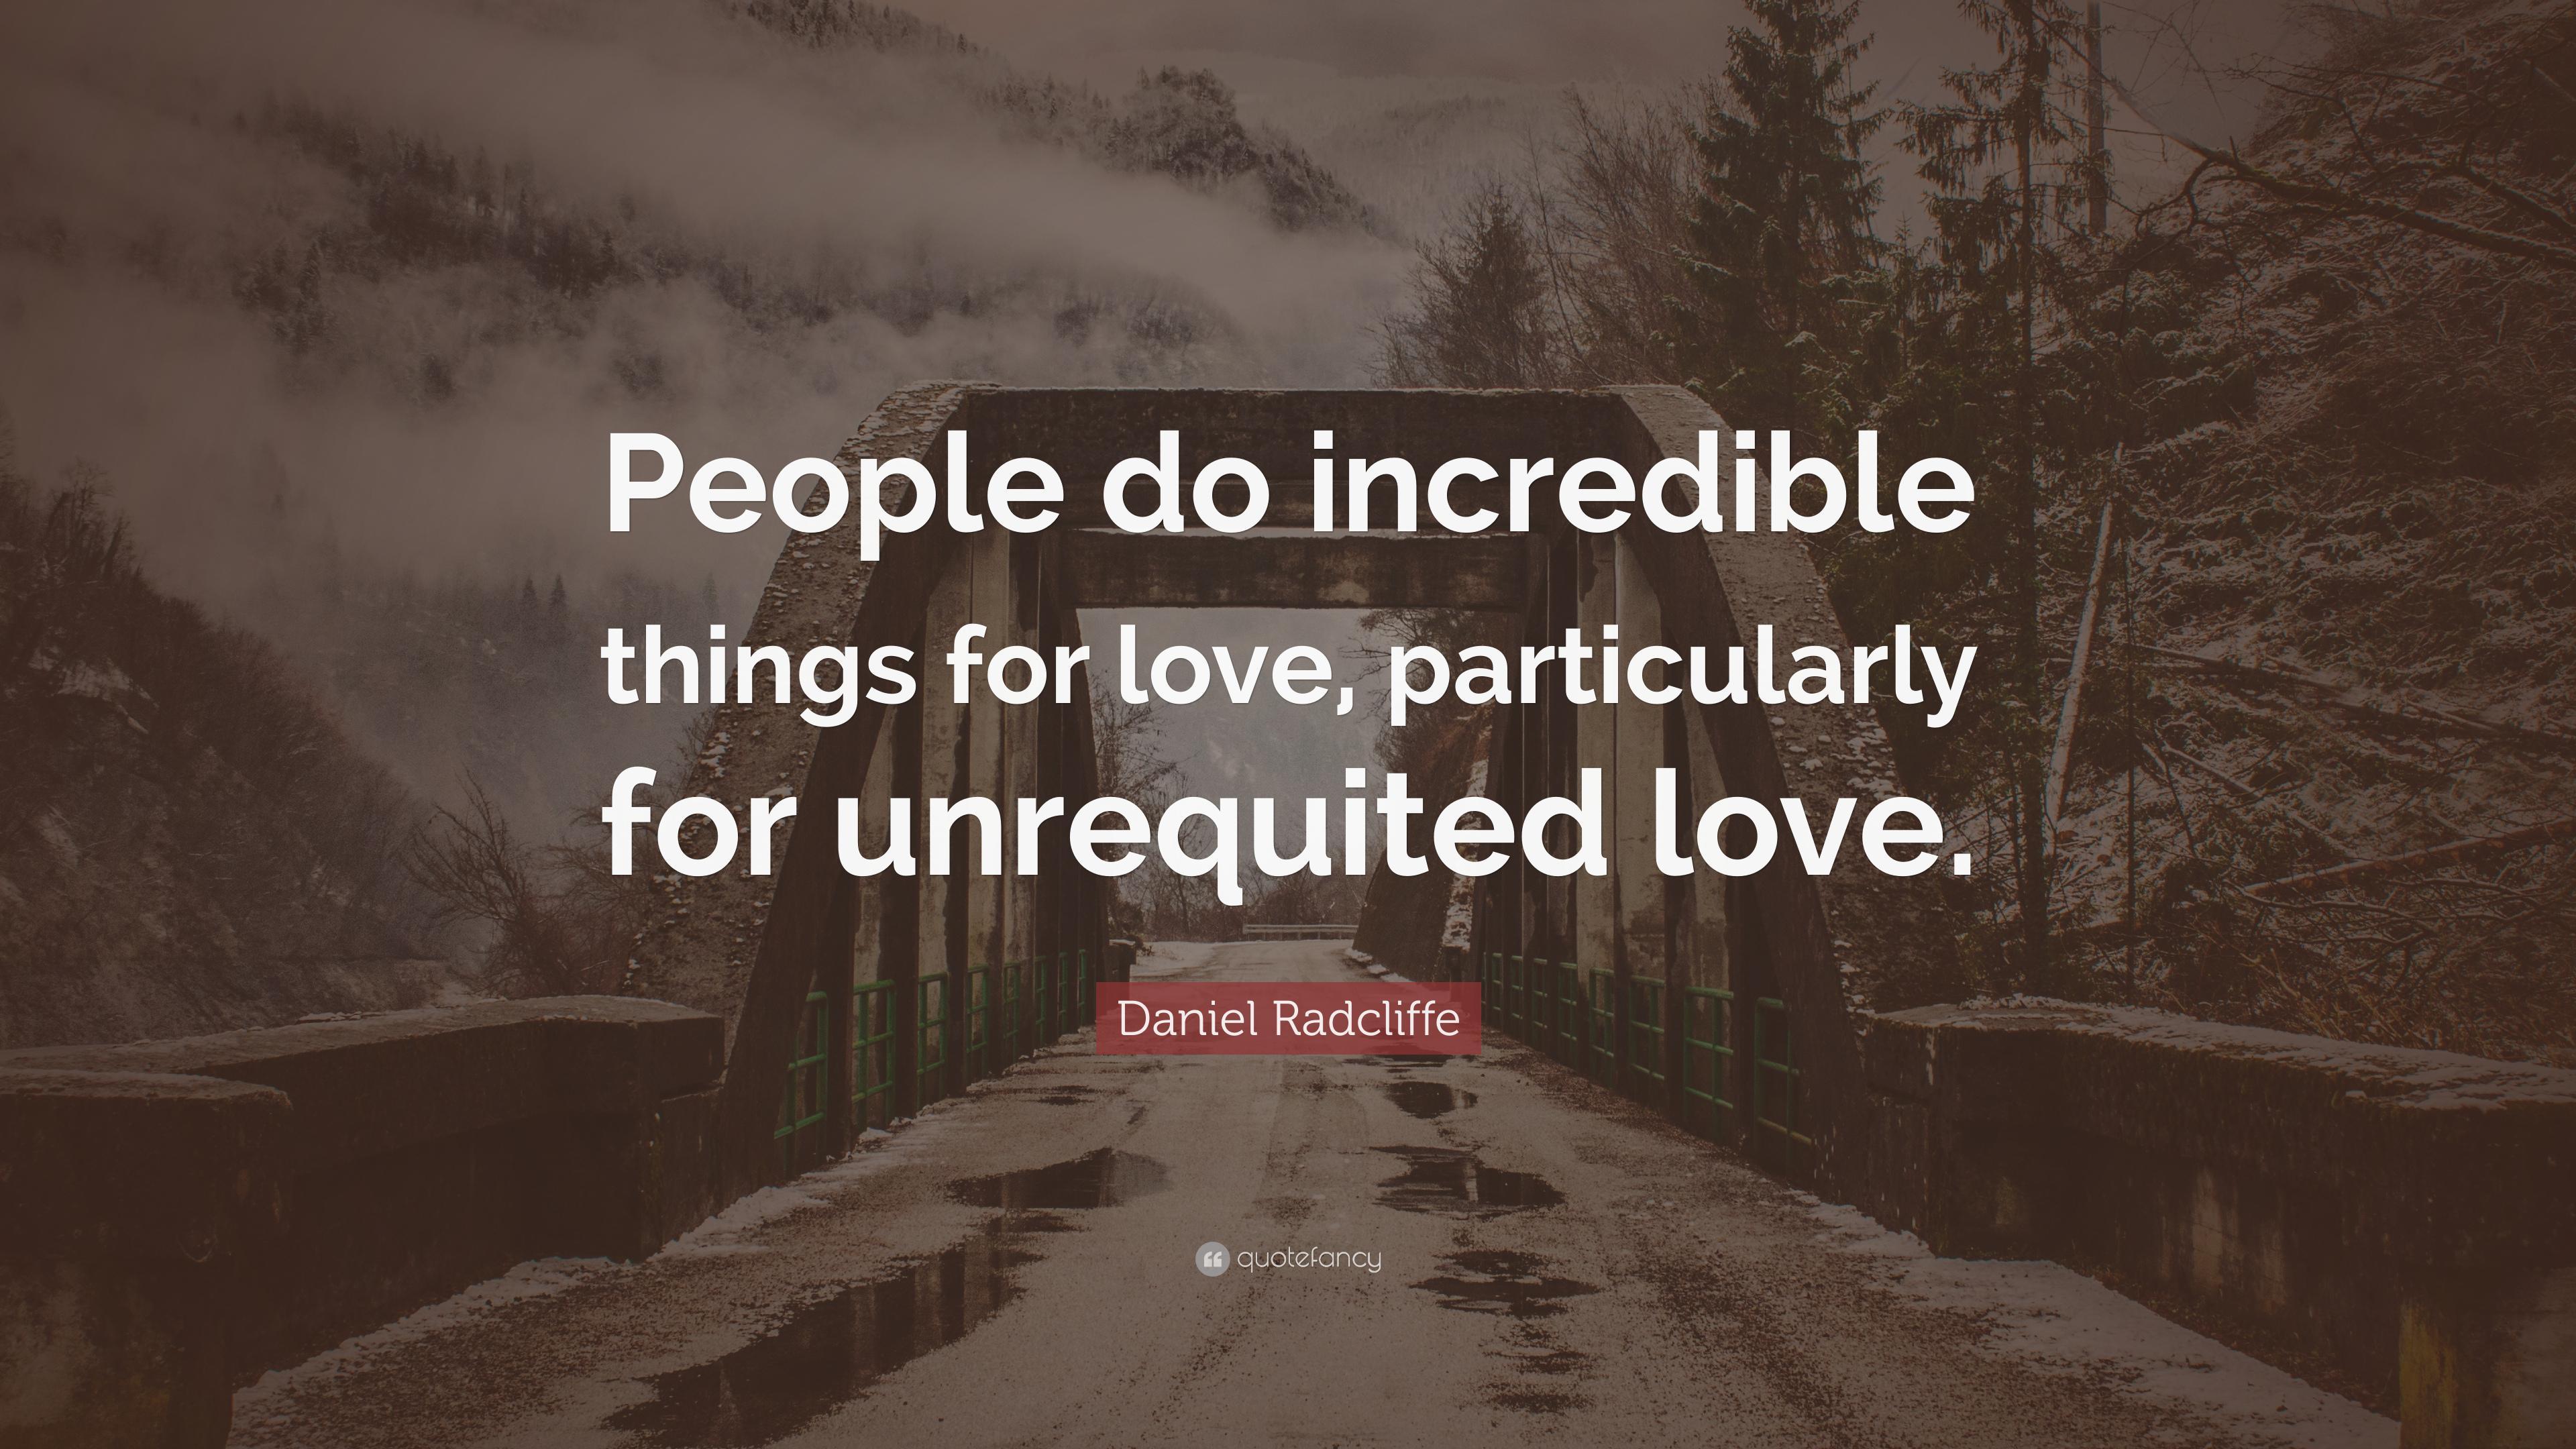 Daniel Radcliffe Quote: “People do incredible things